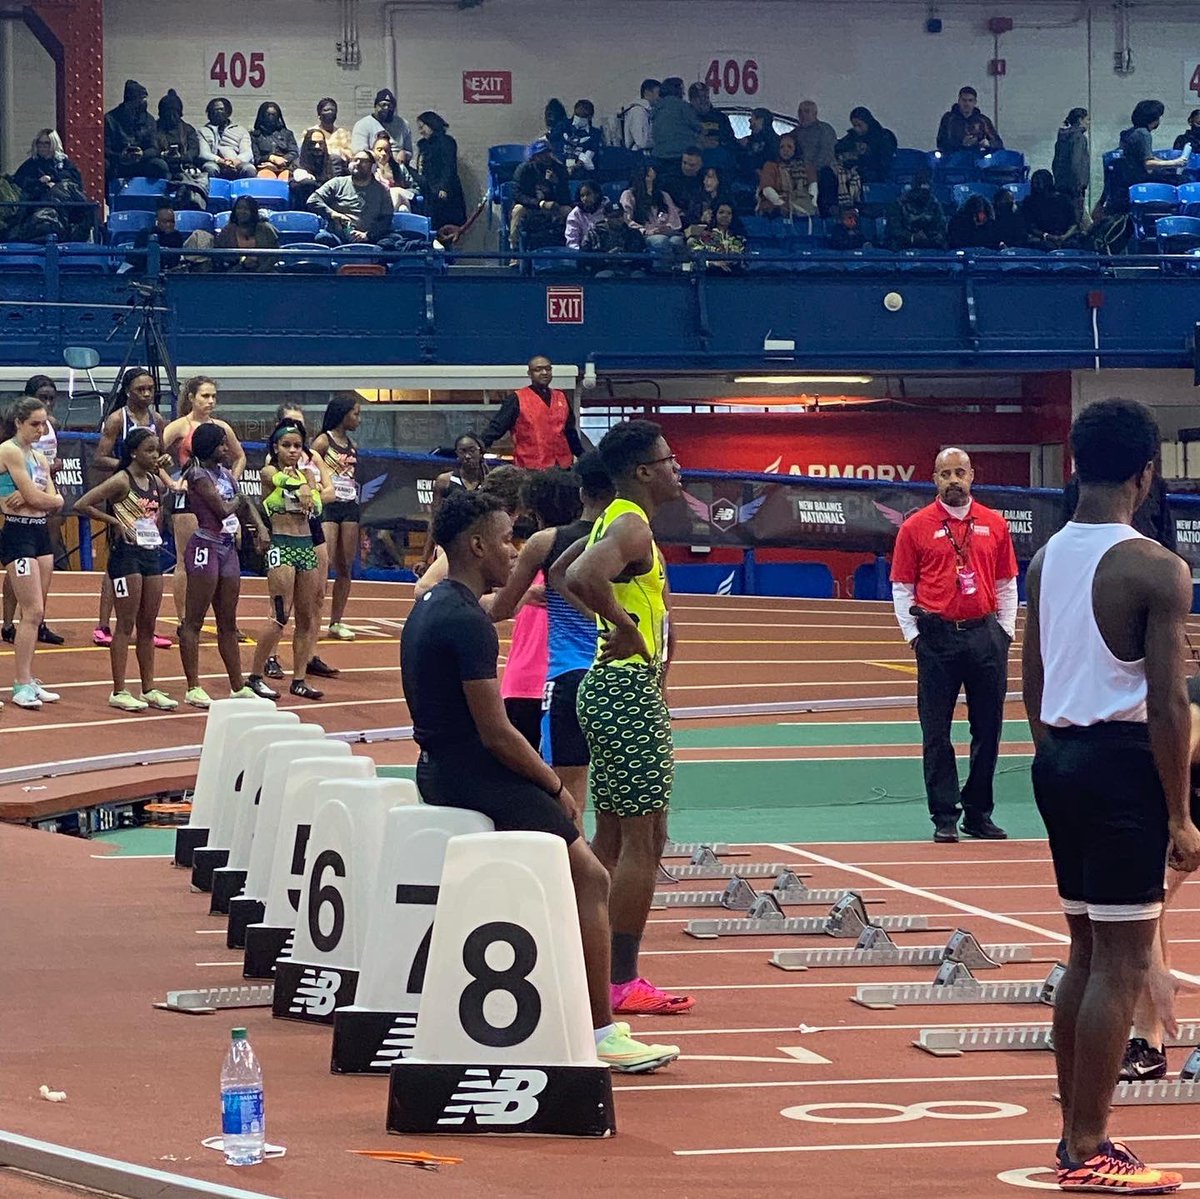 Big day for track and field athlete Messai Maynor. He finished 10th in the freshman 60m at the New Balance Nationals, setting a new school record. He then followed that up with a blazing 3rd place finish in the freshman 200m with a 22.9. Congrats to Messai! ⚓️💛💙